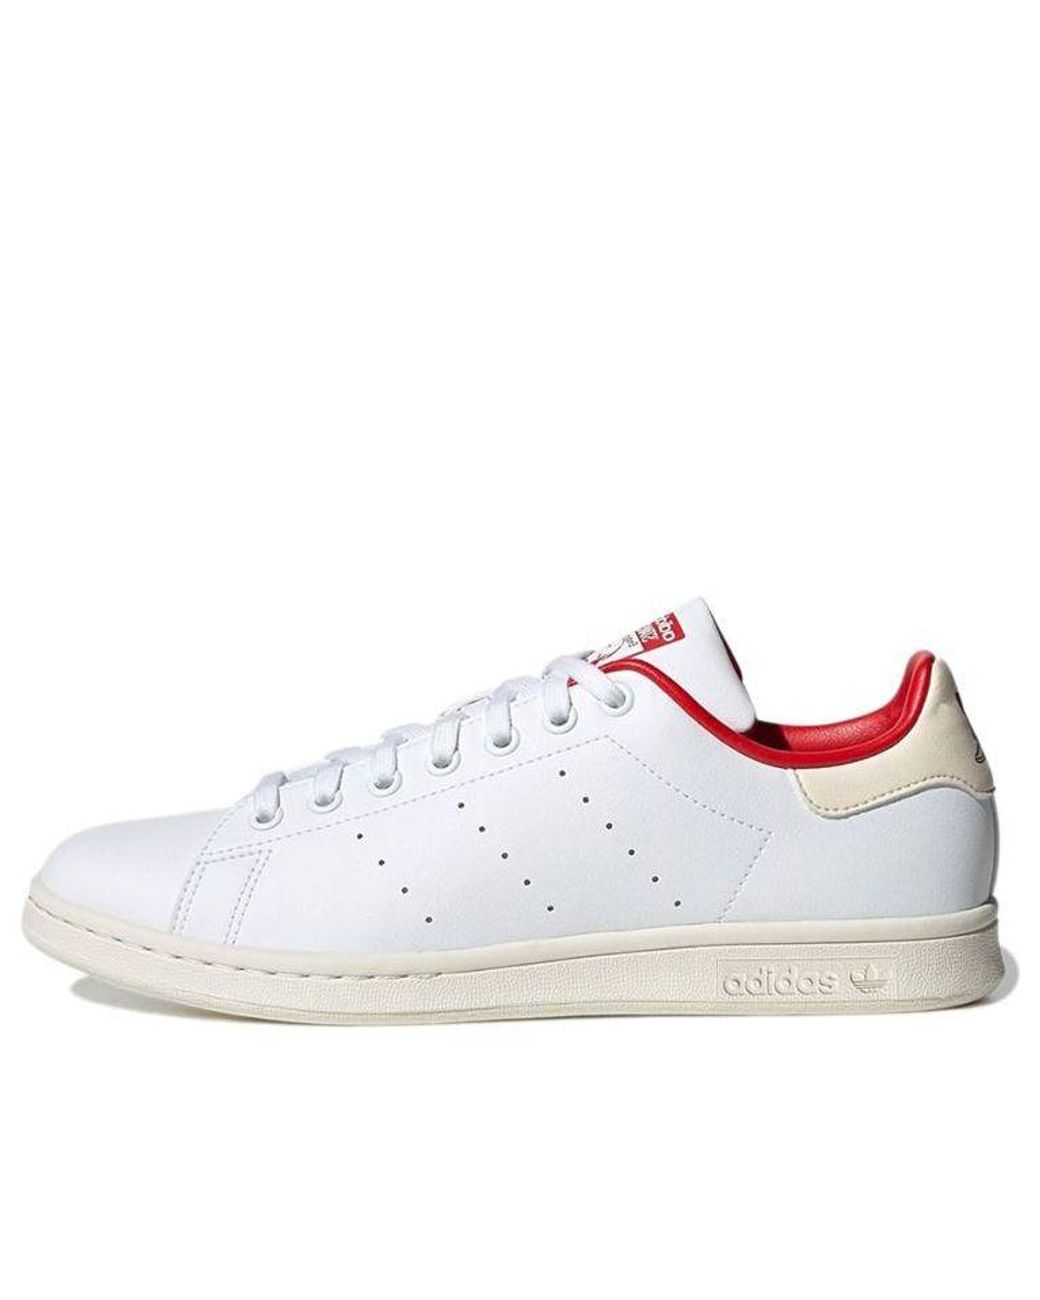 adidas Originals Stan Smith Retro Casual Skateboarding Shoes White Red |  Lyst